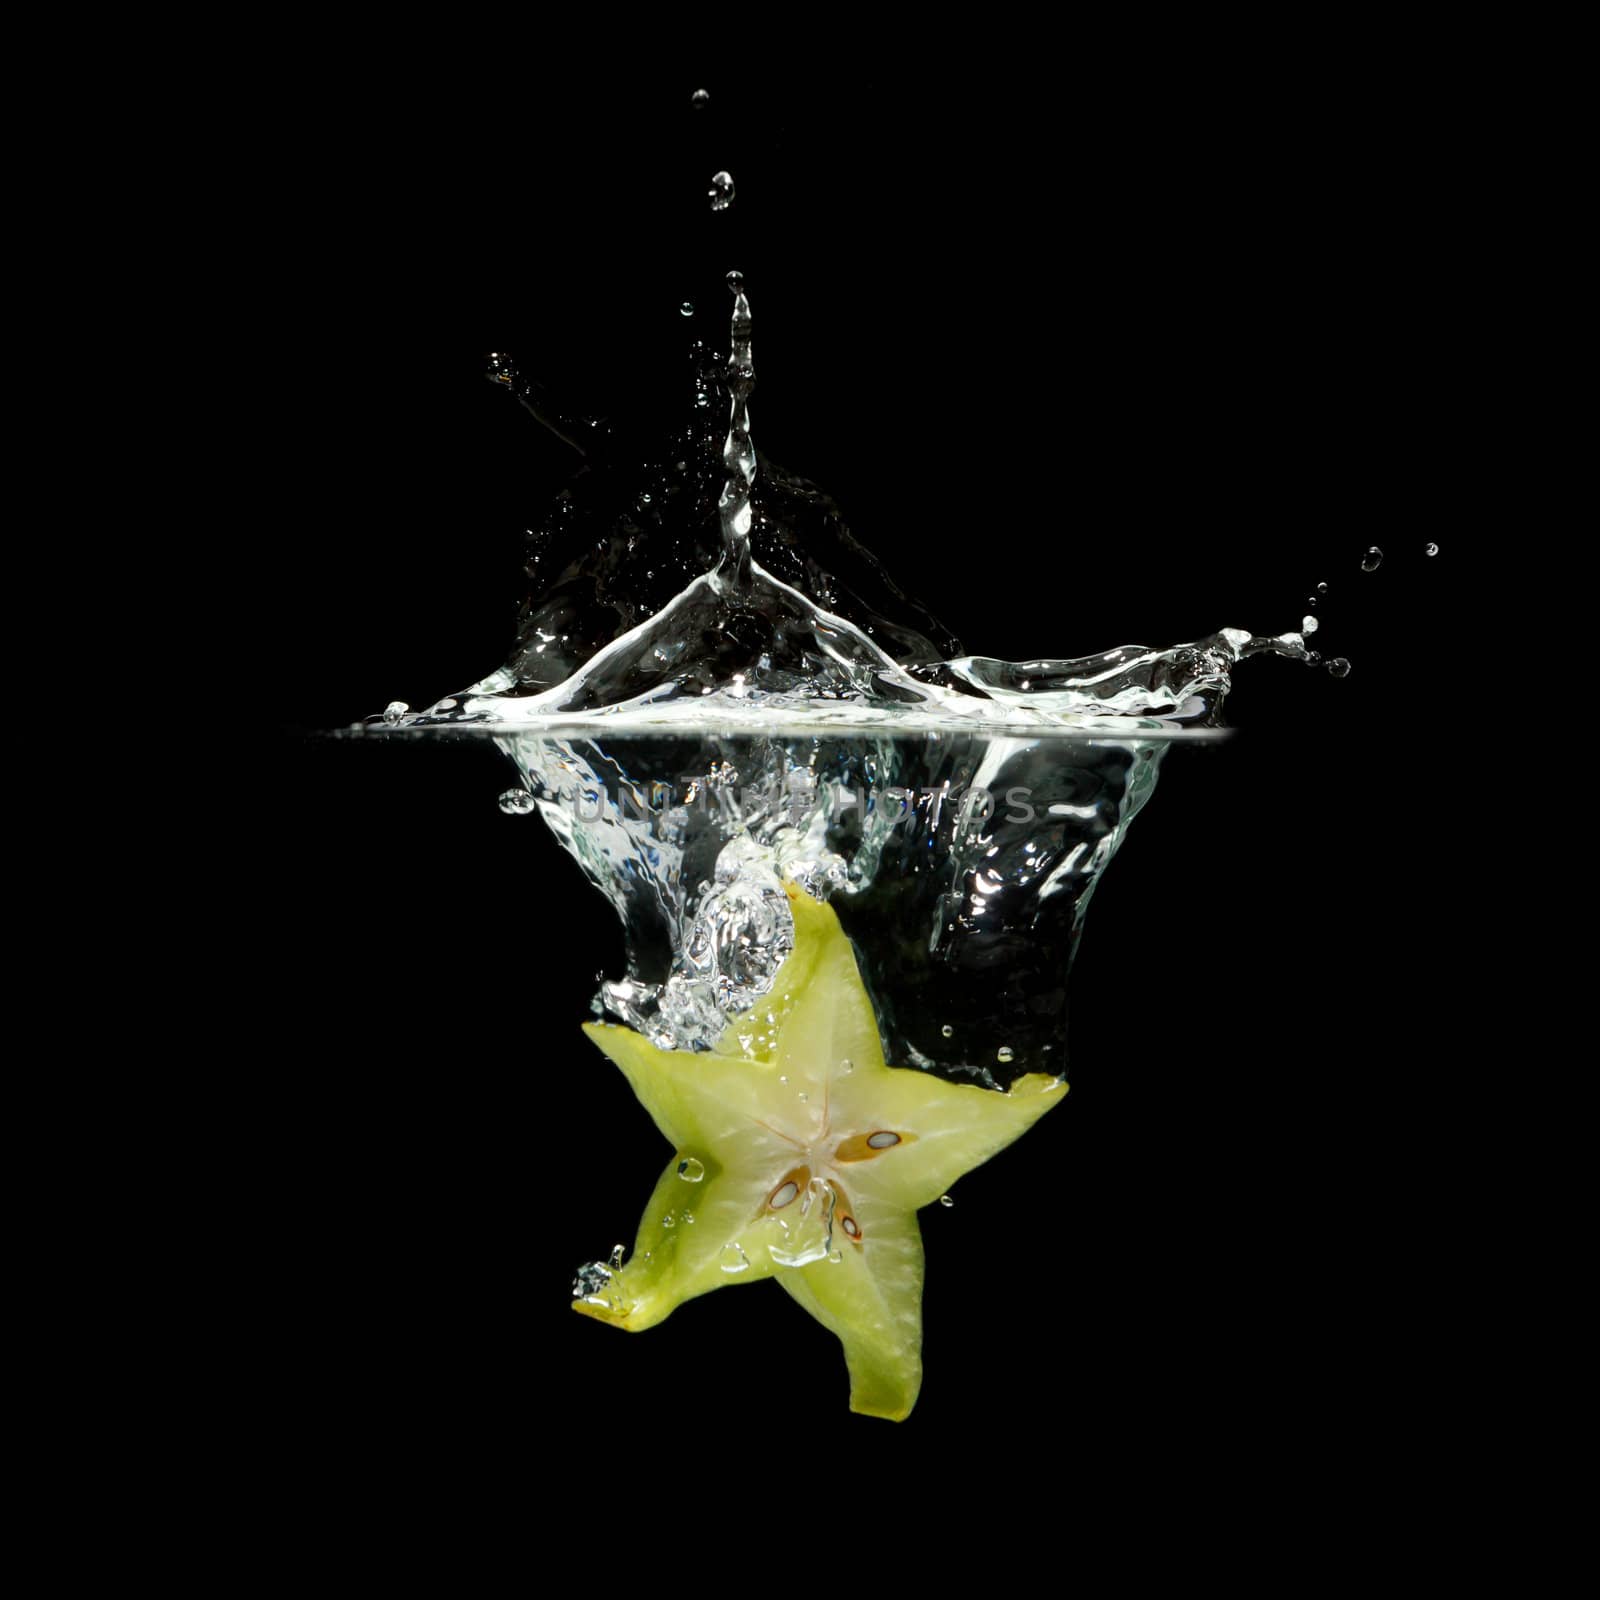 carambola splashing in water by Discovod